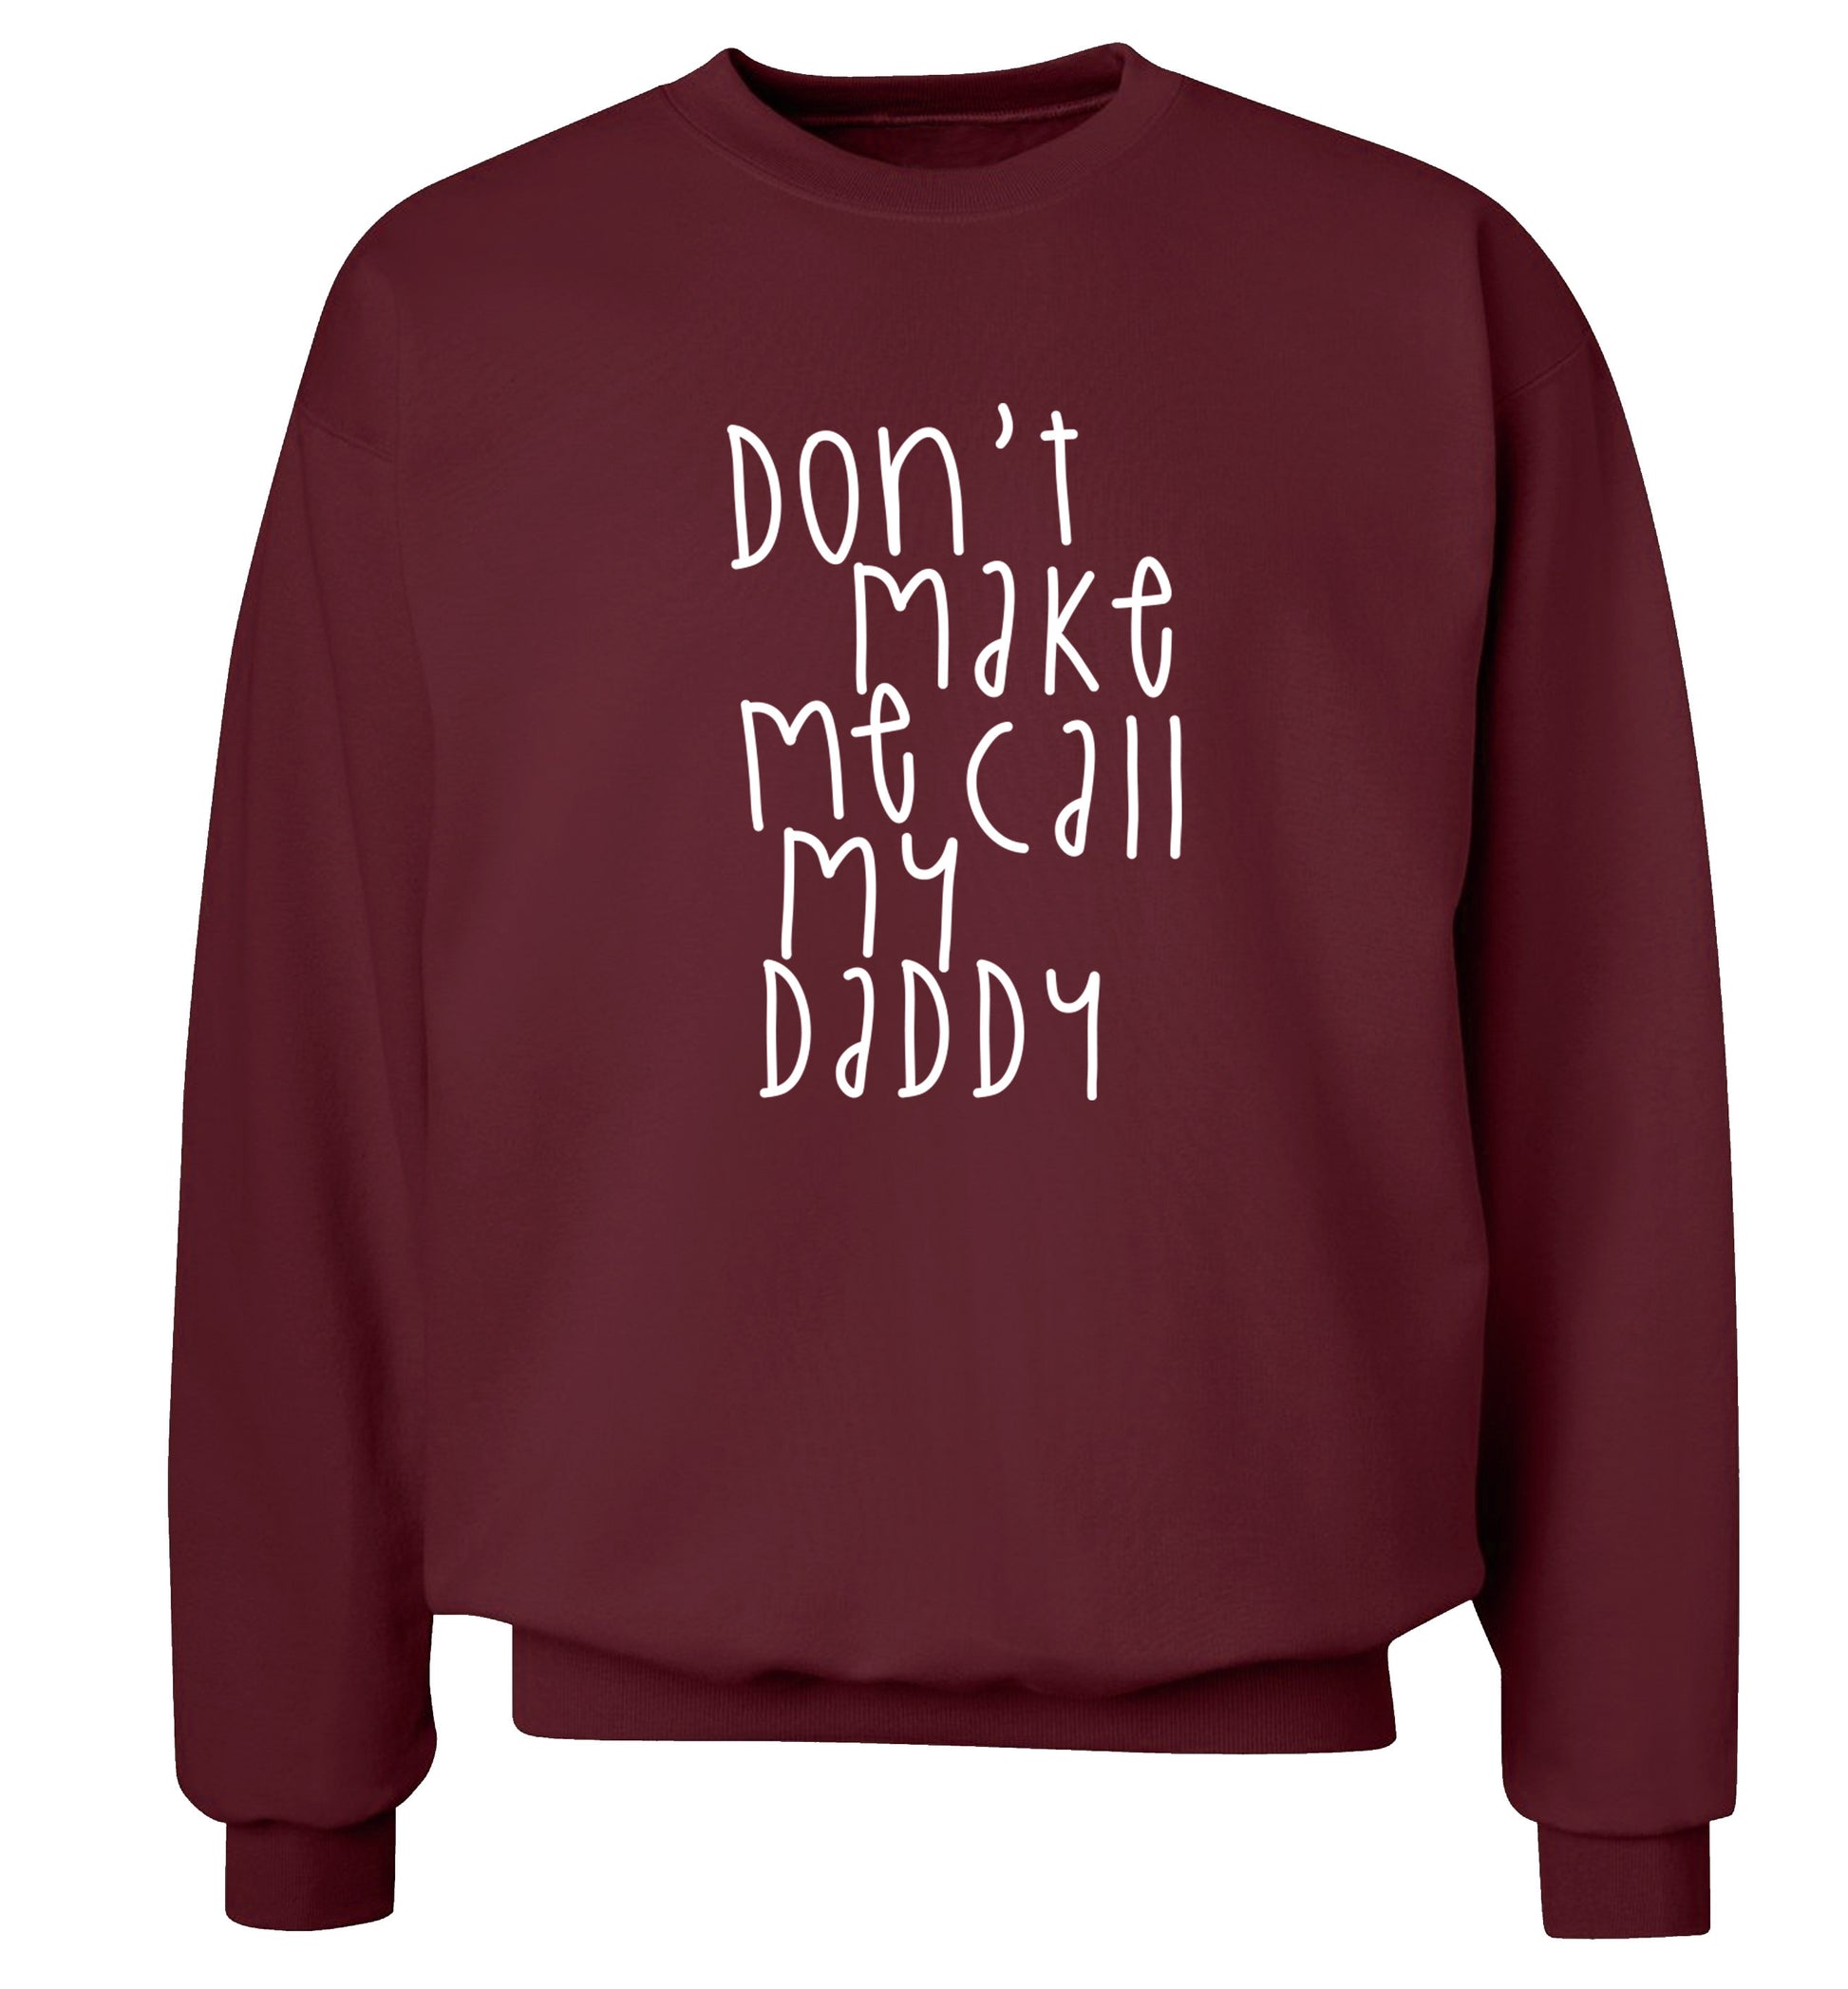 Don't make me call my daddy Adult's unisex maroon Sweater 2XL